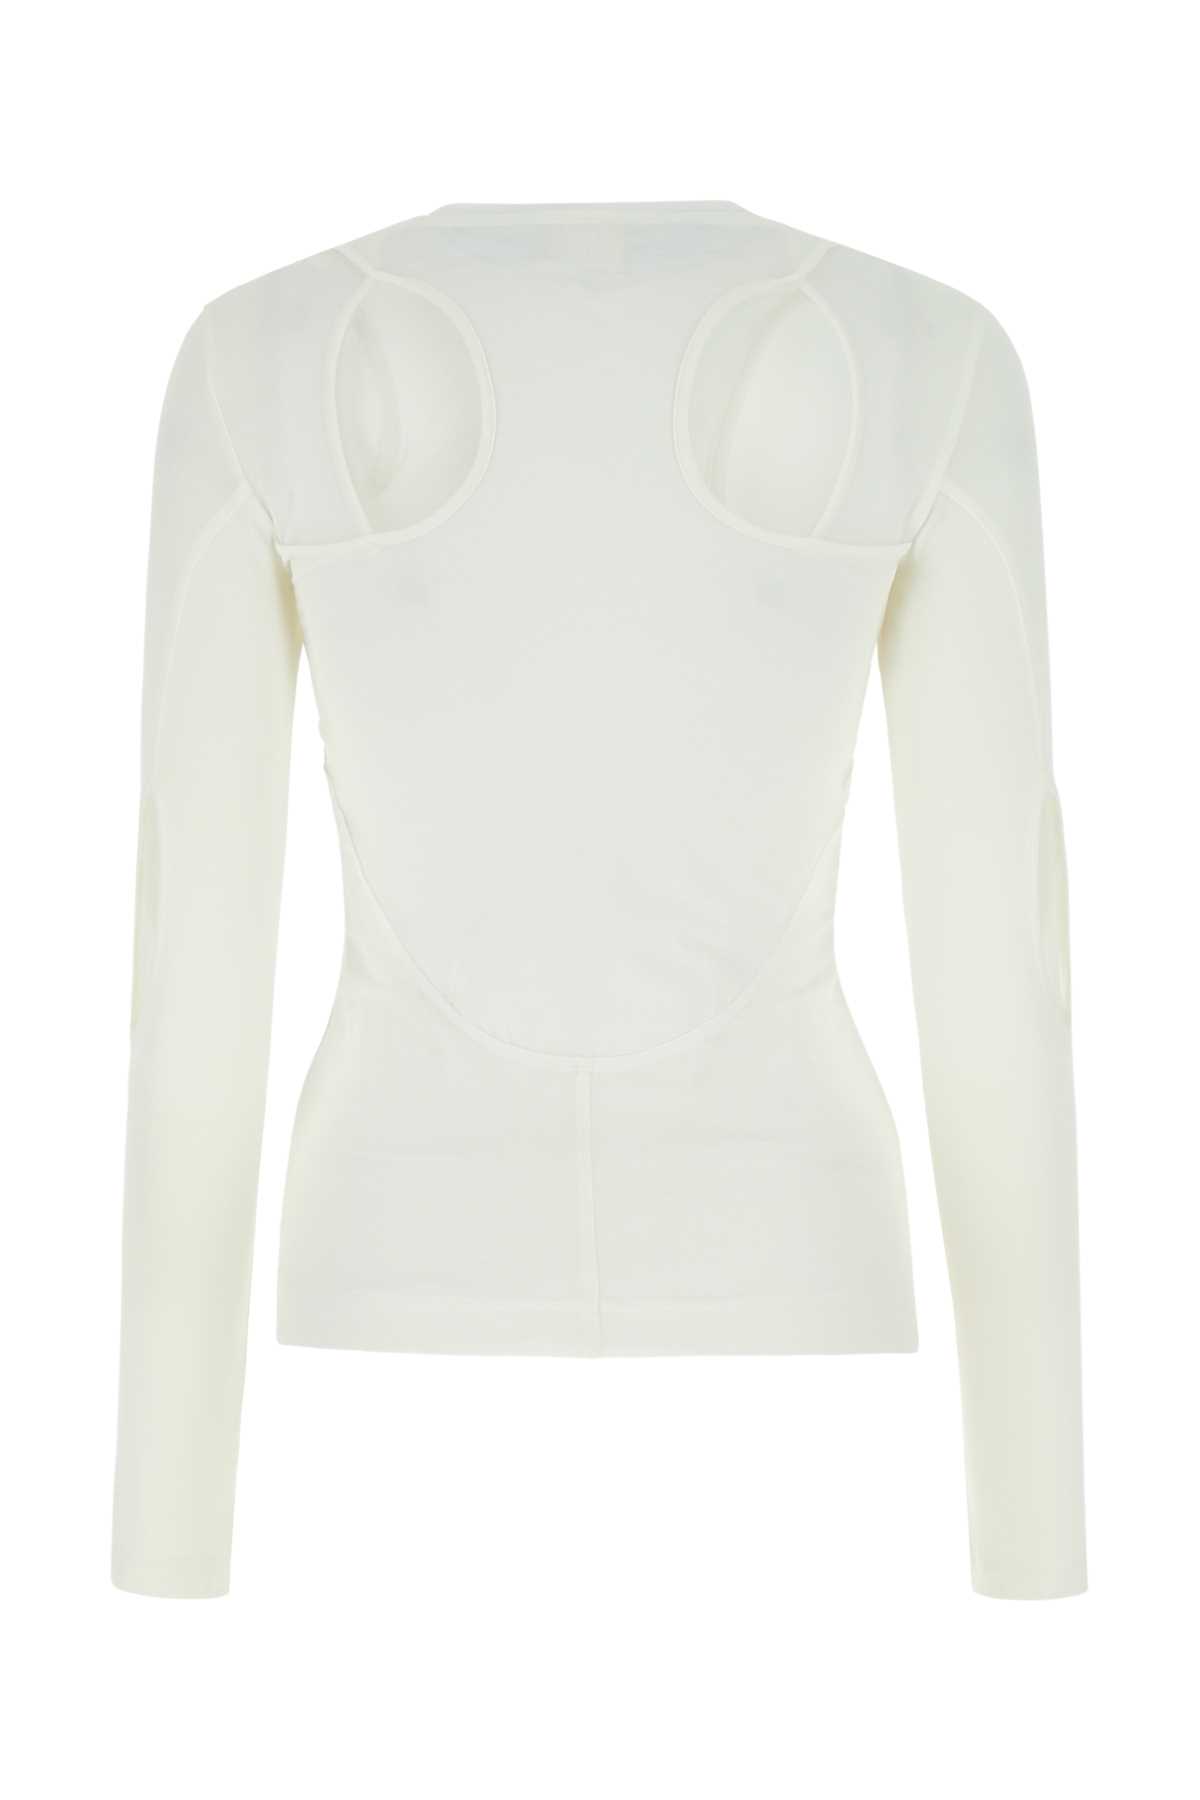 Shop Givenchy White Stretch Nylon Top In 100